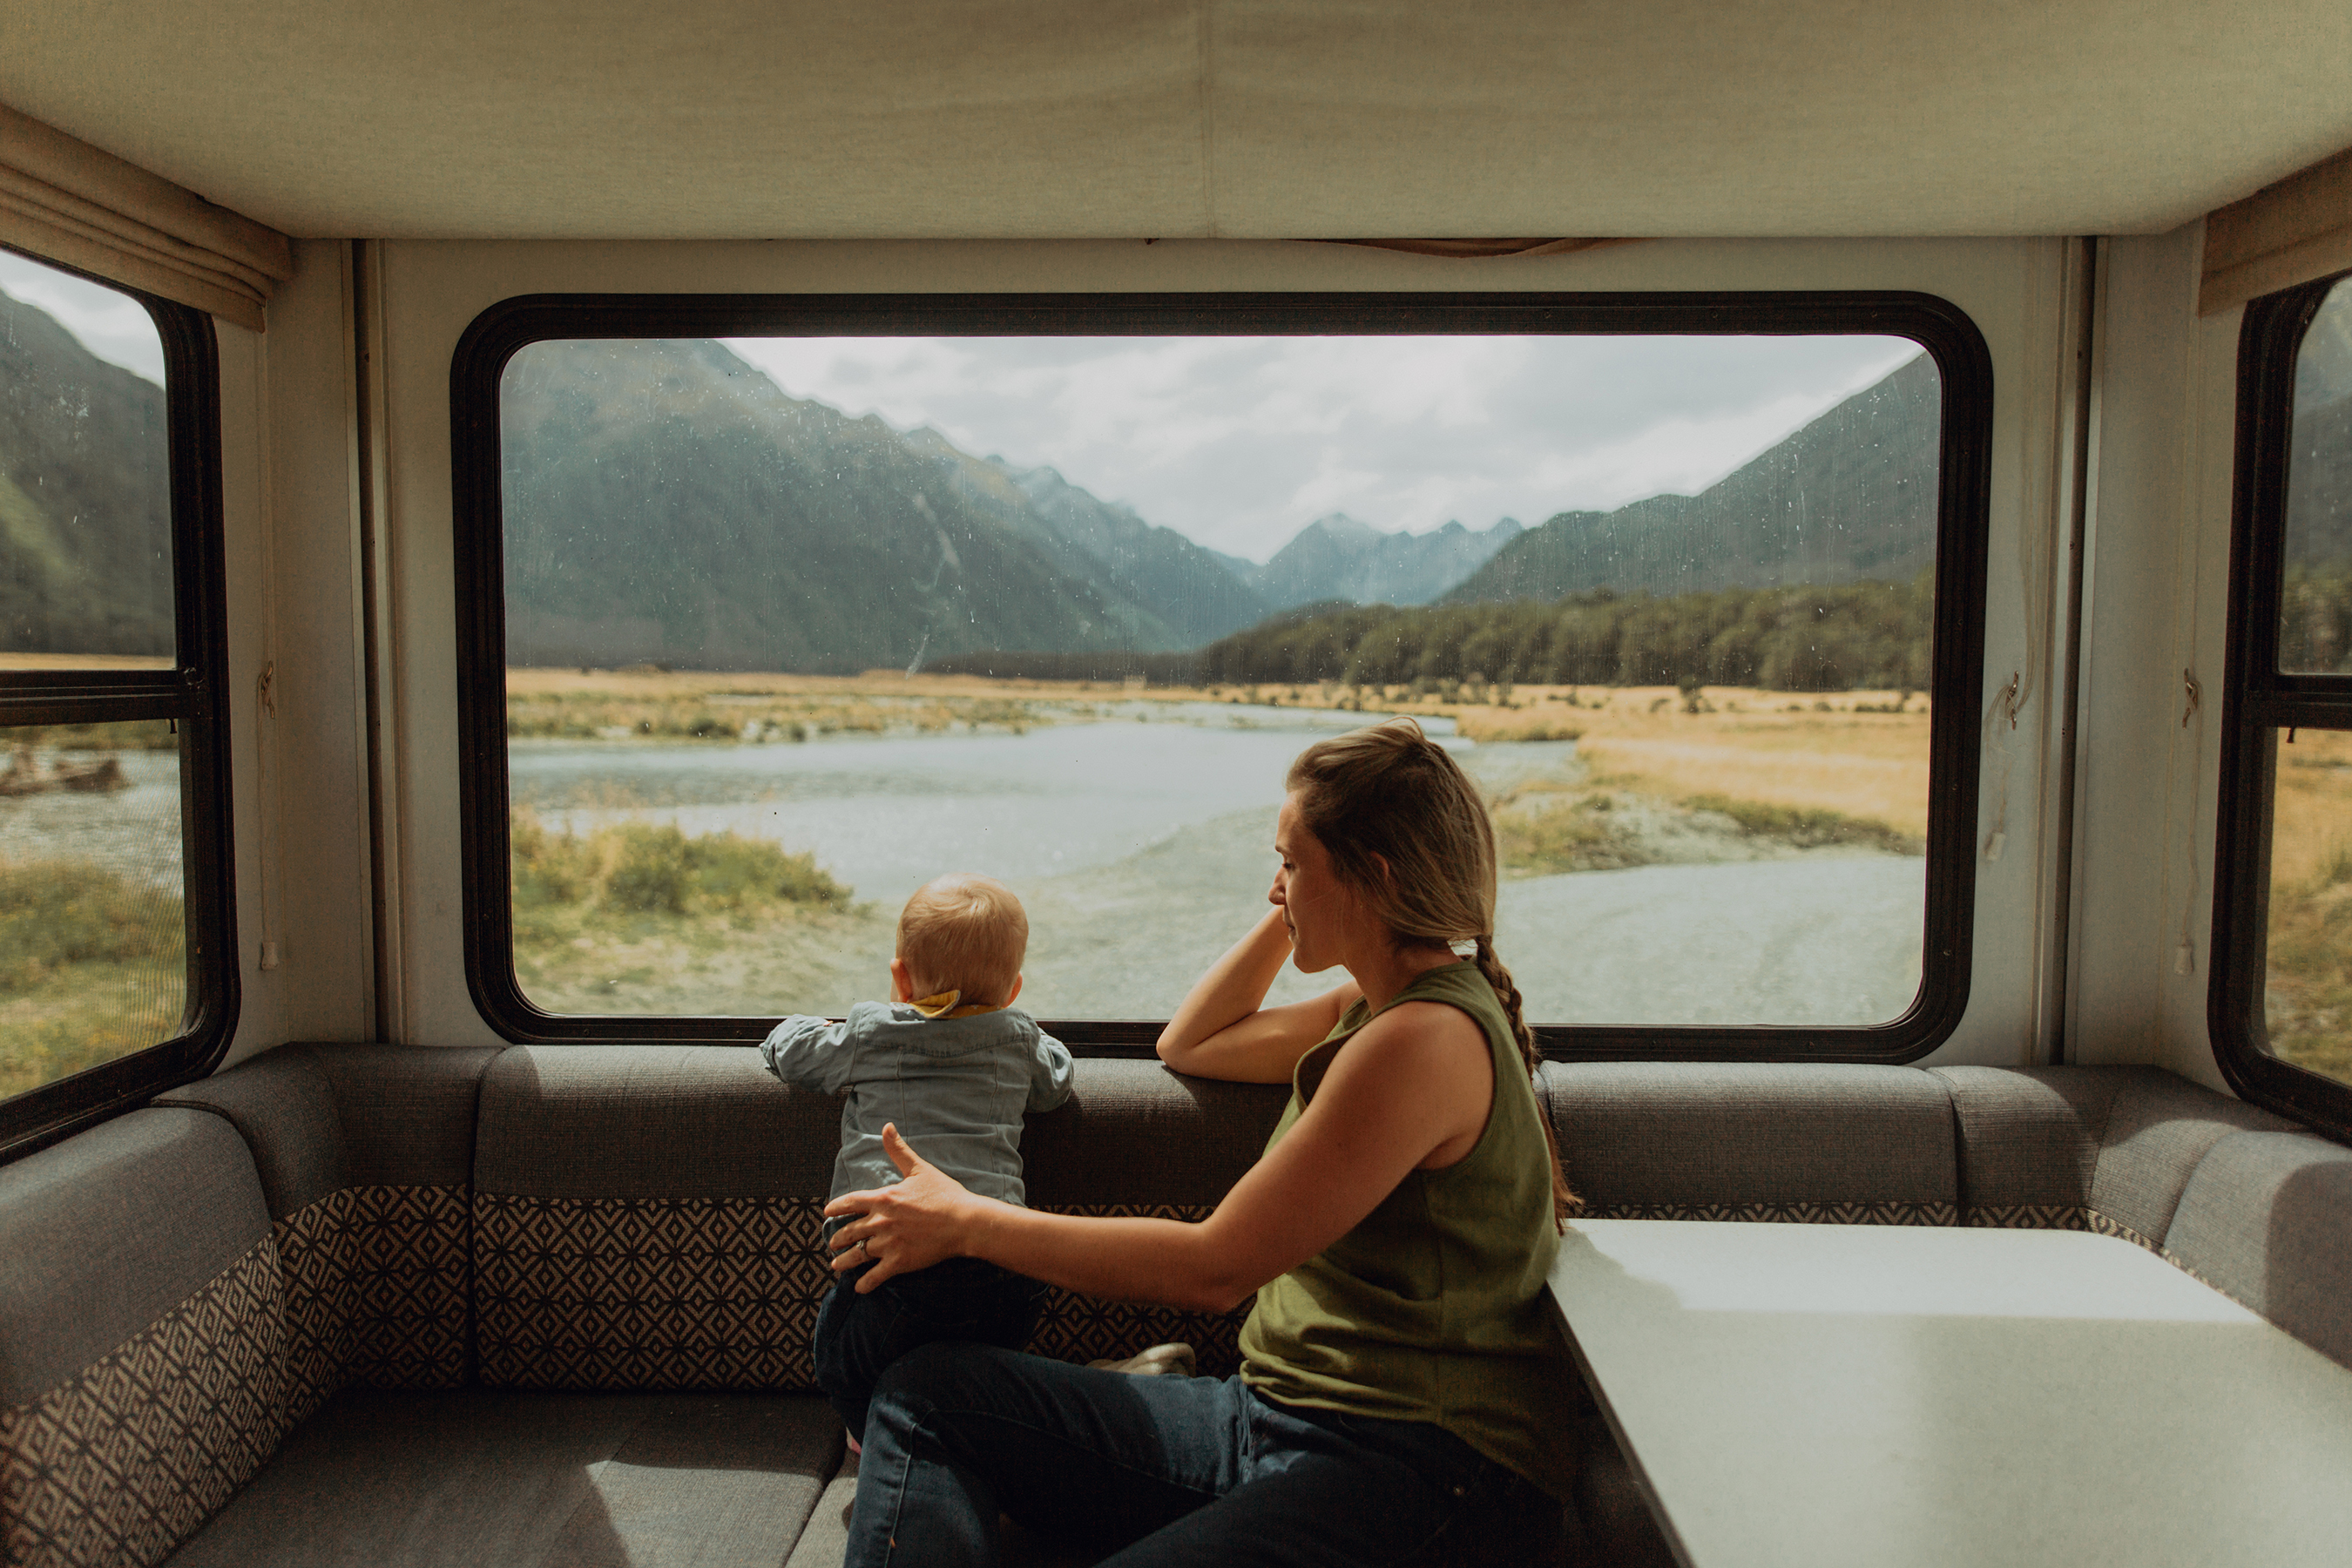 How To Live in an RV Full Time